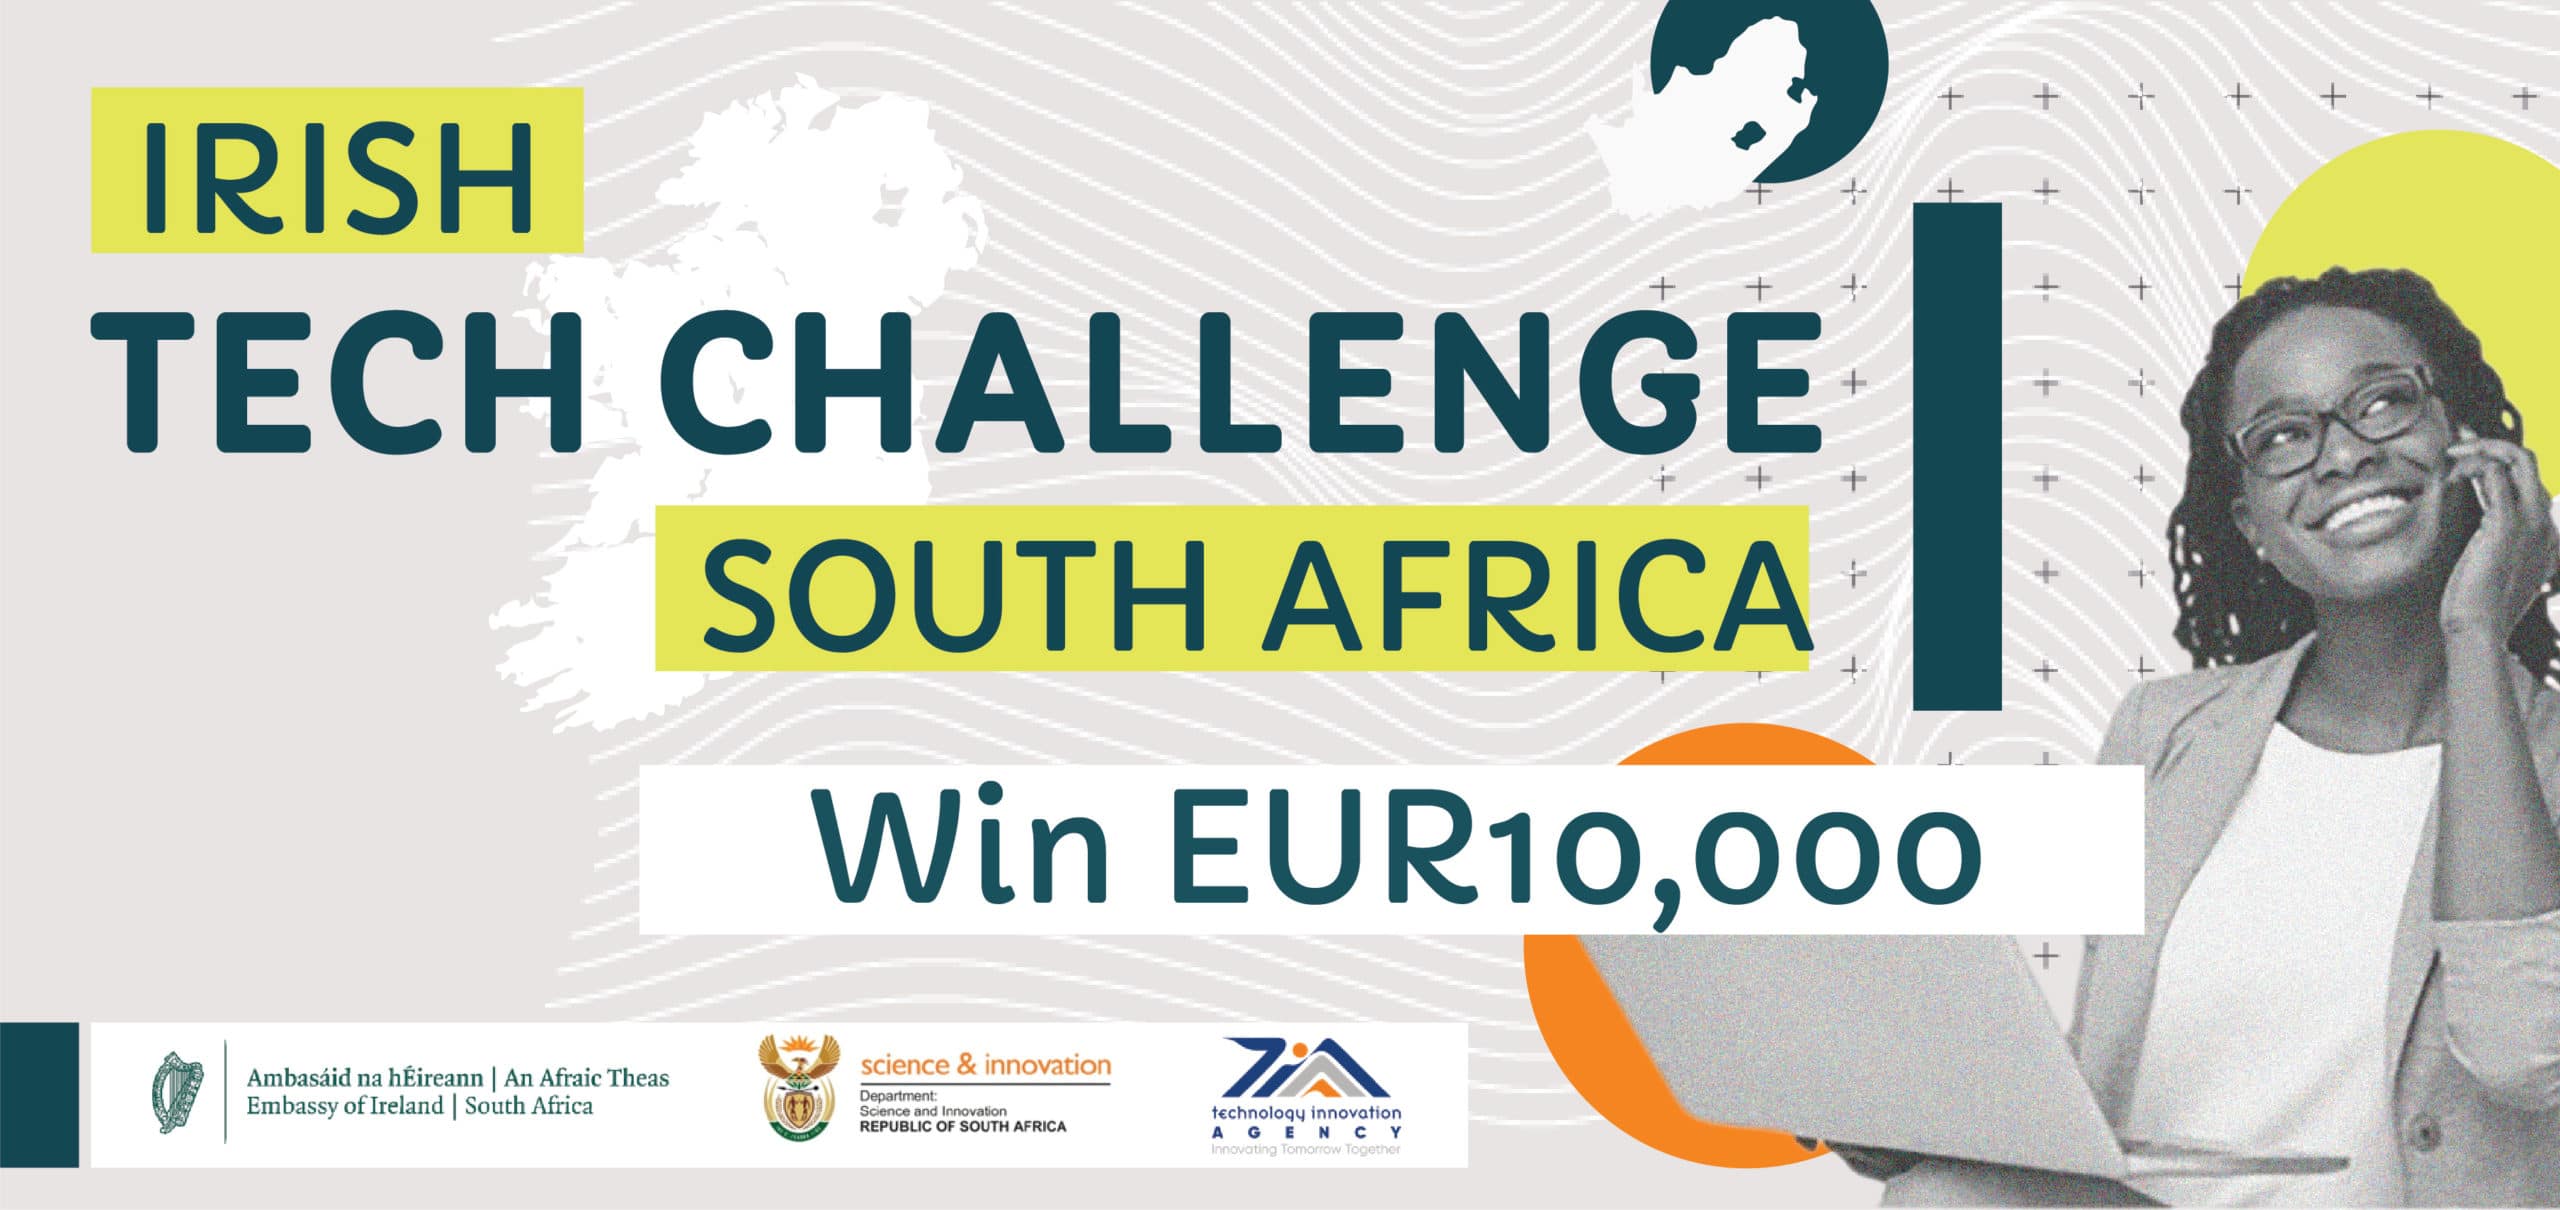 Irish Tech Challenge South Africa 2022 for South African Entrepreneurs